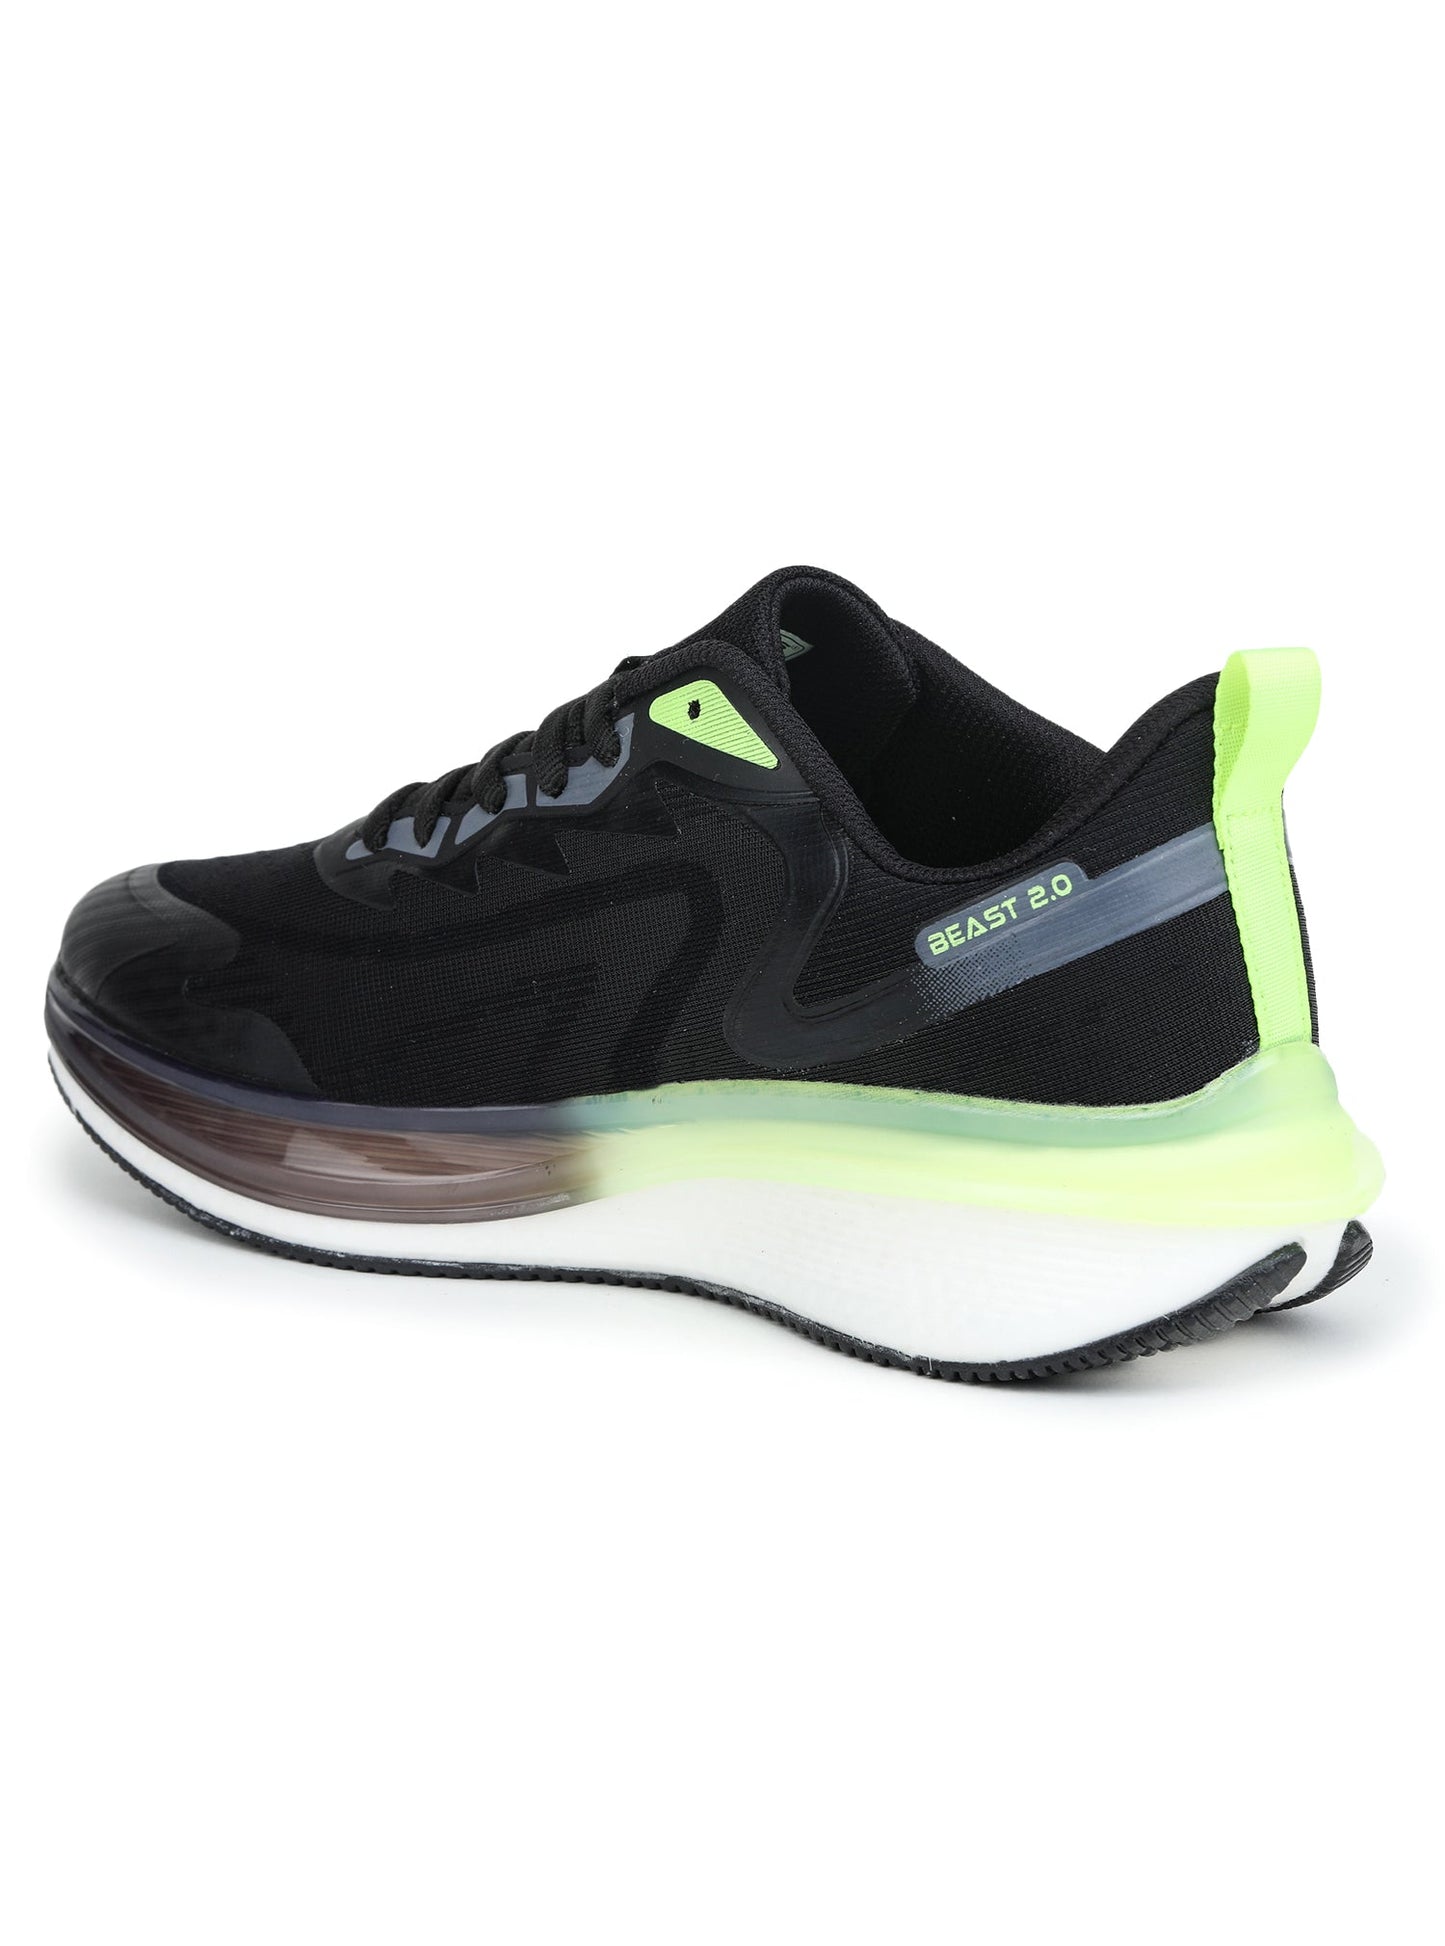 ABROS DRIFT Sports shoes For Men's